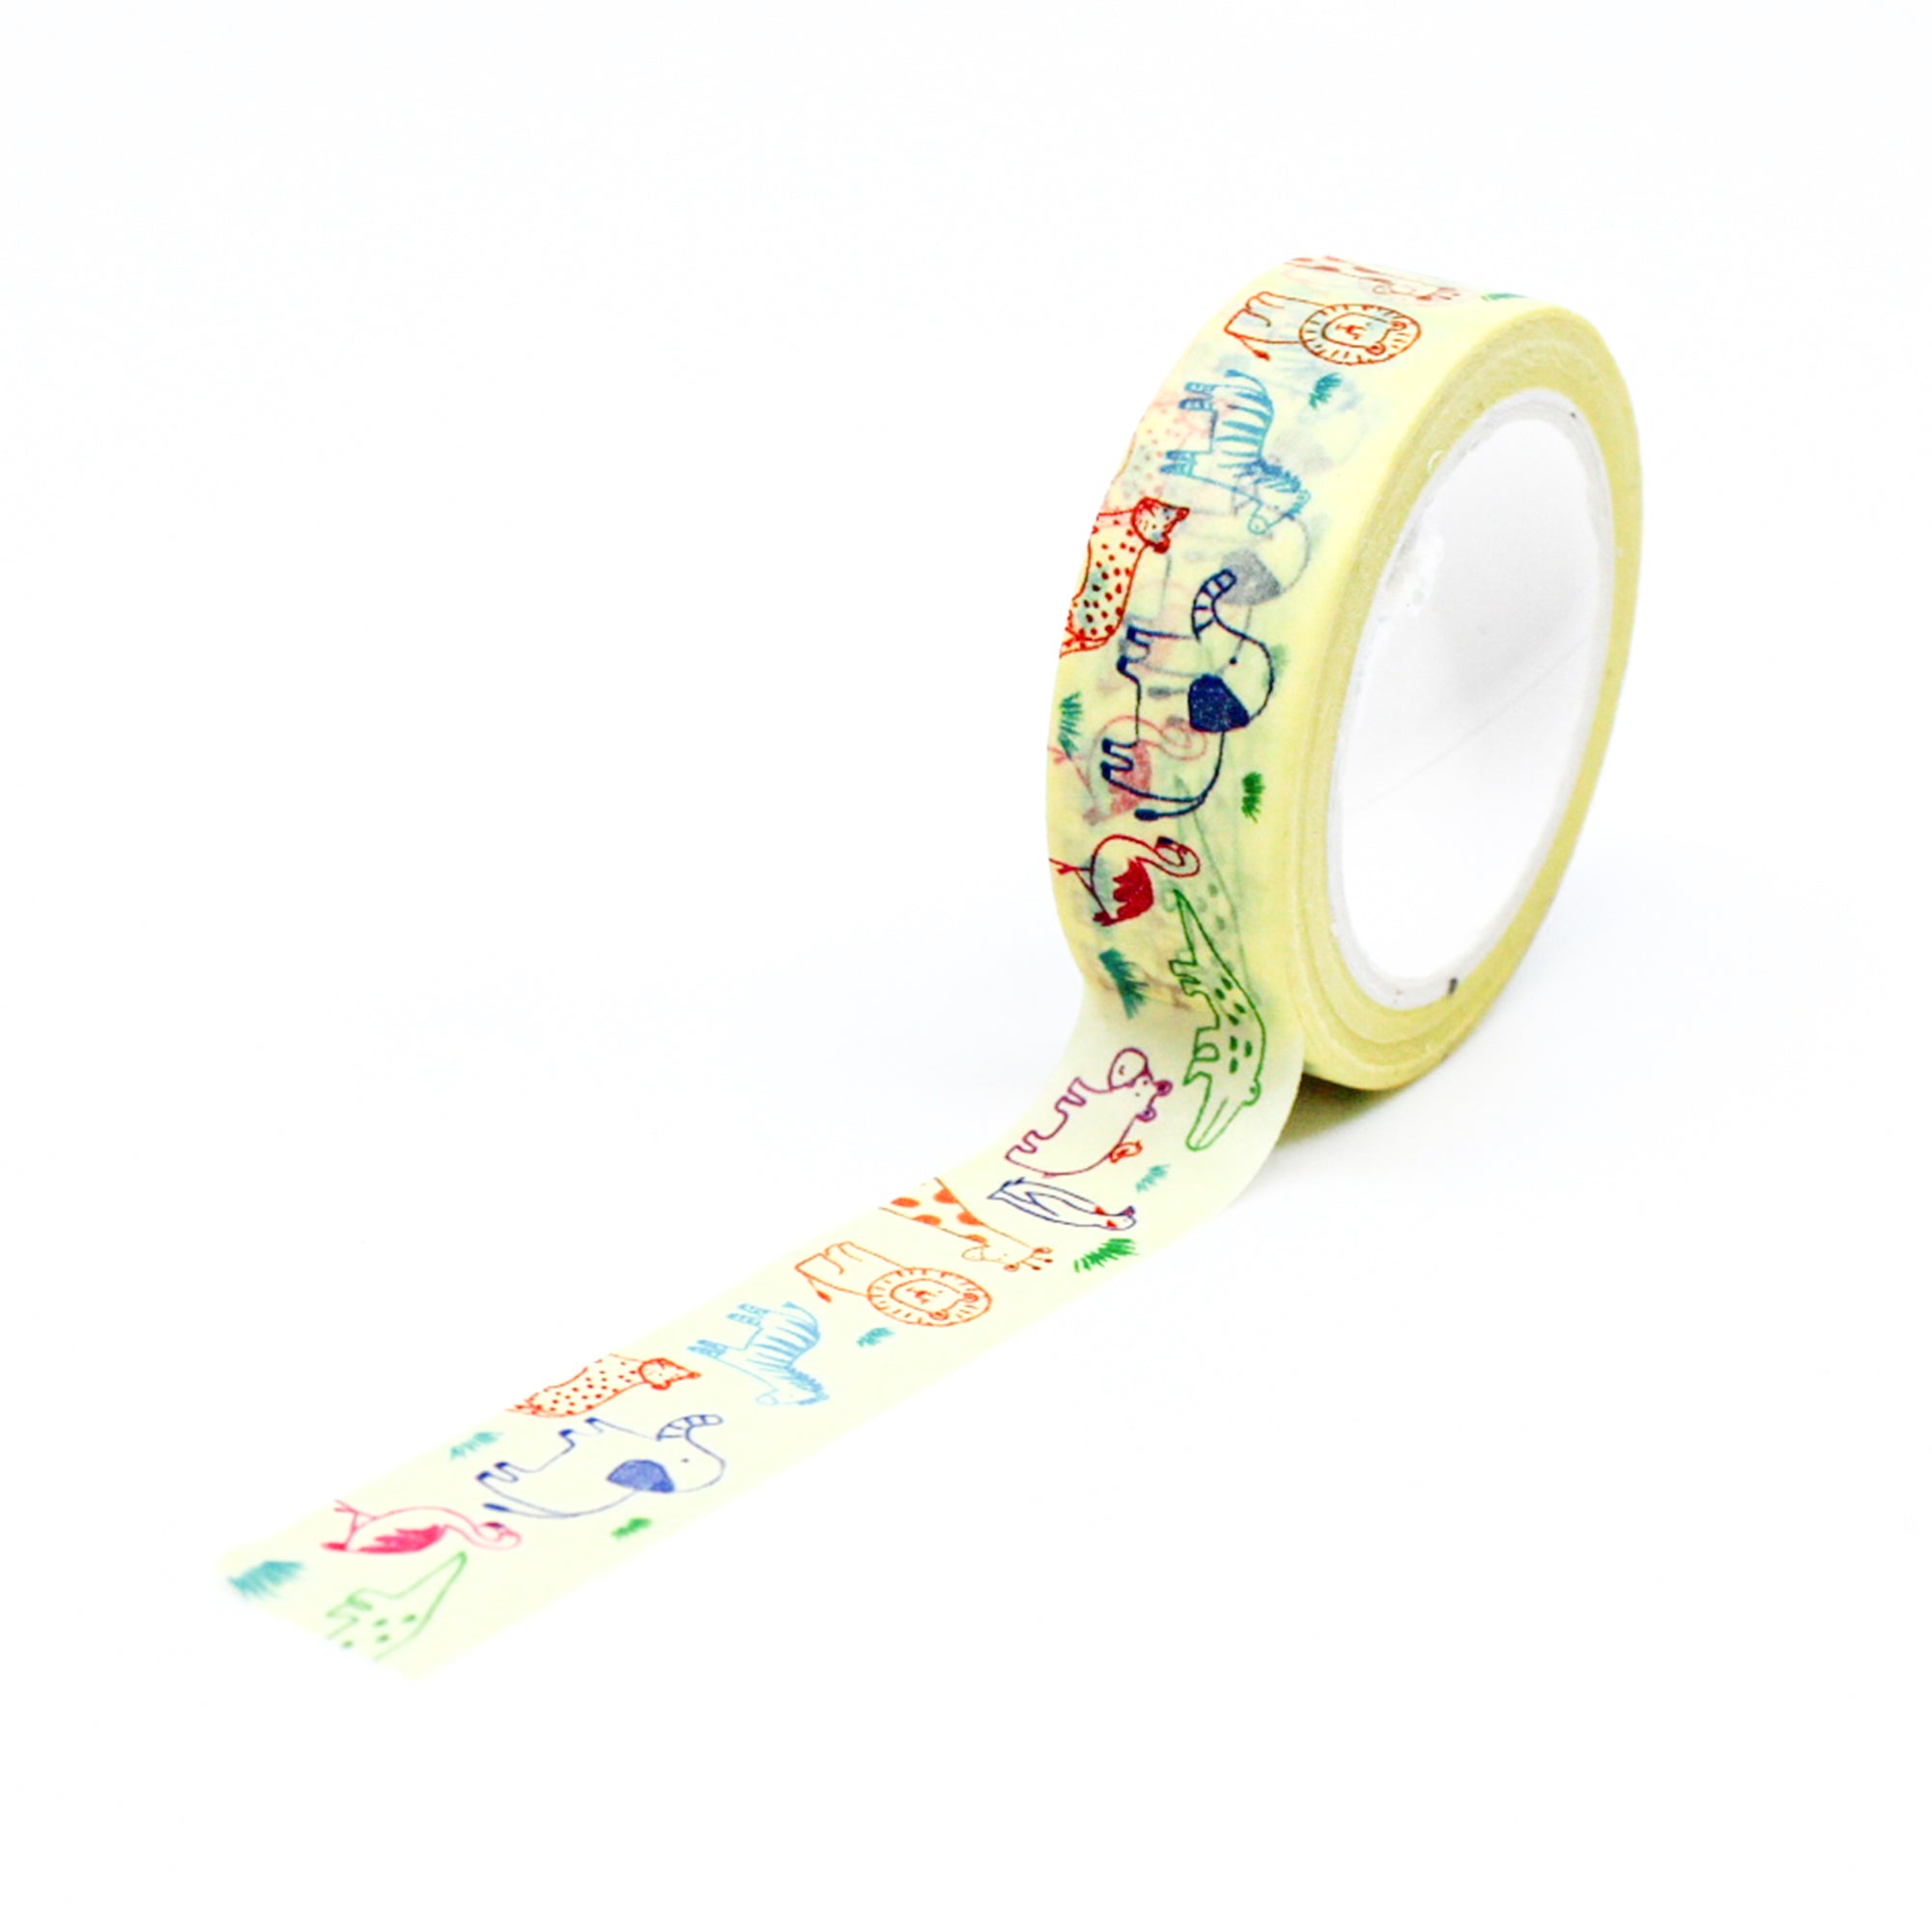 Unleash your creativity with our Zoo Animal Sketches Washi Tape, adorned with charming sketches of zoo animals. Perfect for adding a touch of the wild to your projects. This tape is from Girl of All Work and sold at BBB Supplies Craft Shop.